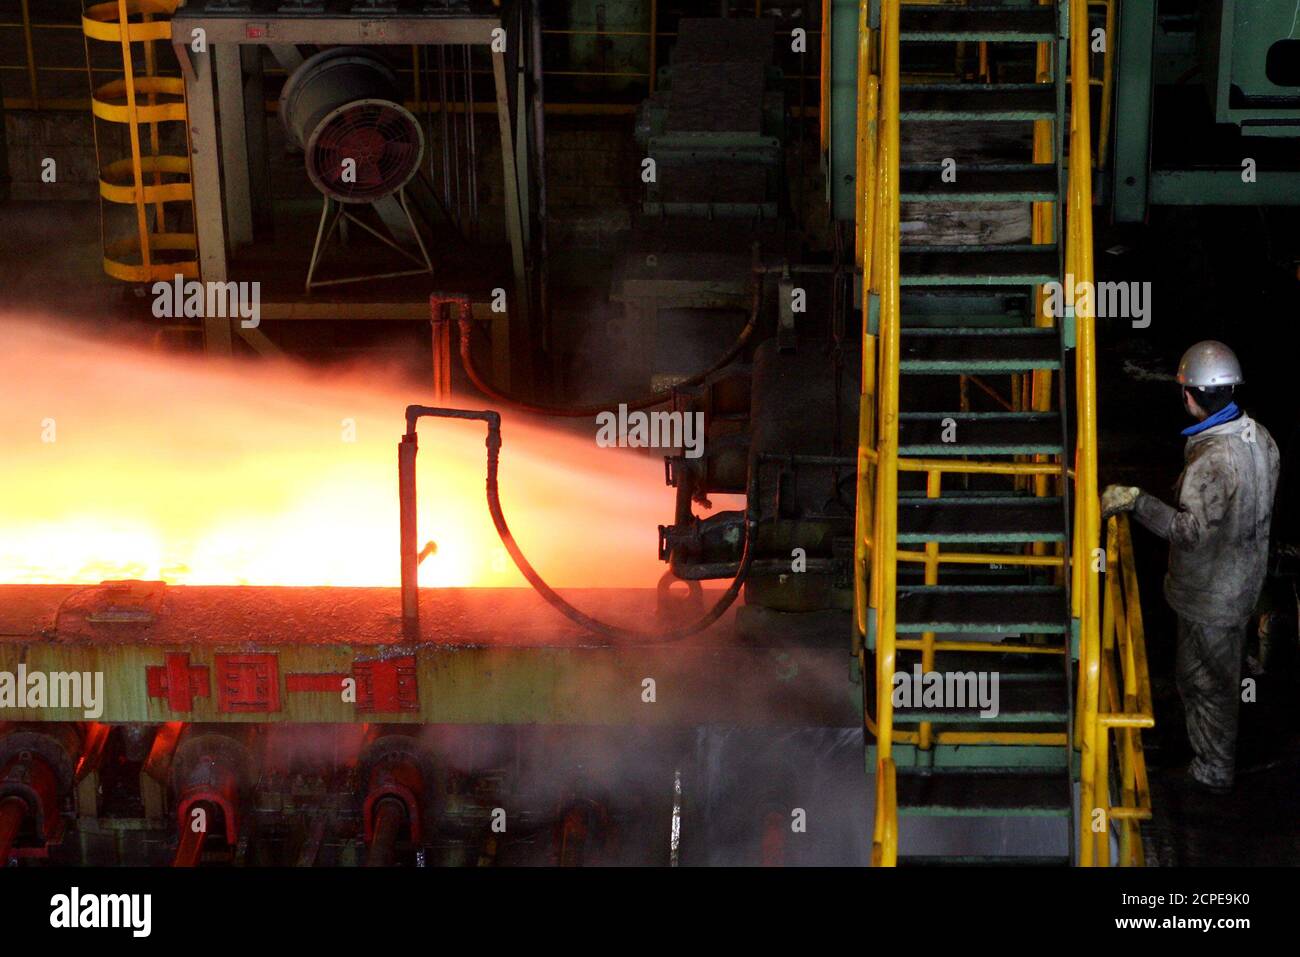 A Chinese worker monitors hot-rolled steel at the Baosteel factory in Shanghai February 25, 2005. China, the world's top steel producer, is expected to see steel output growth fall by half this year as mills focus on higher quality steel for ship building and trim output for construction, Xie Qihua, chairwoman of China's largest steel maker Baosteel Group said on Friday. REUTERS/Claro Cortes IV  CC/CN Stock Photo